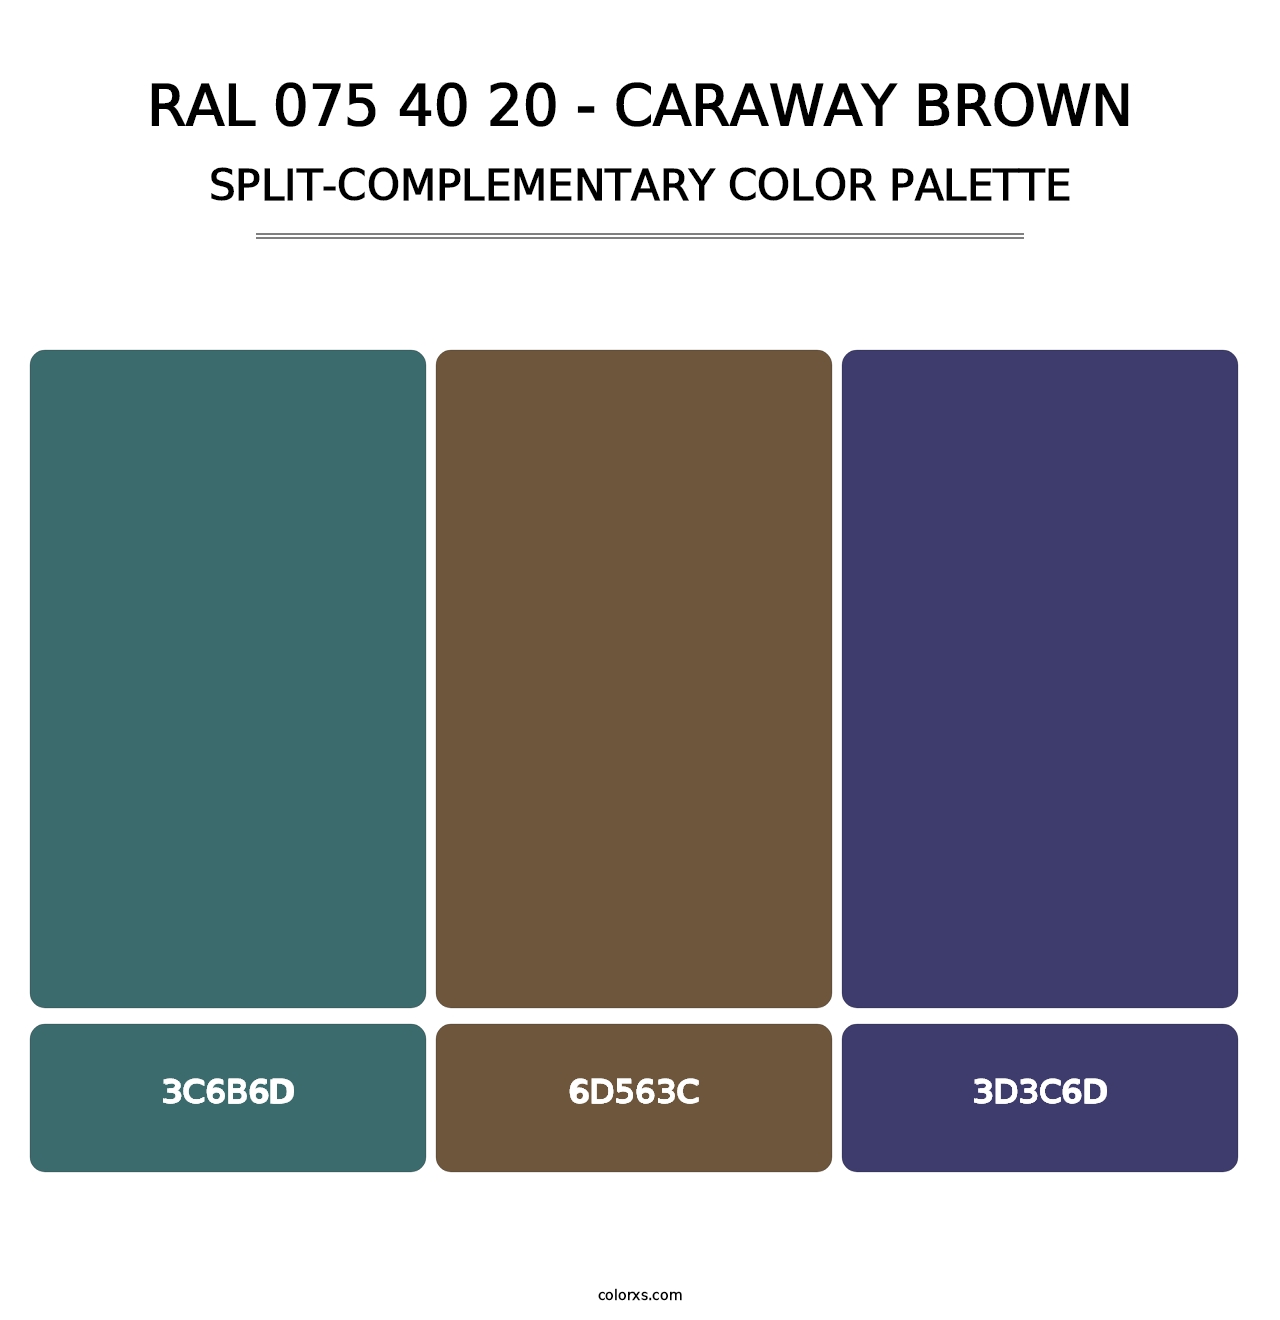 RAL 075 40 20 - Caraway Brown - Split-Complementary Color Palette